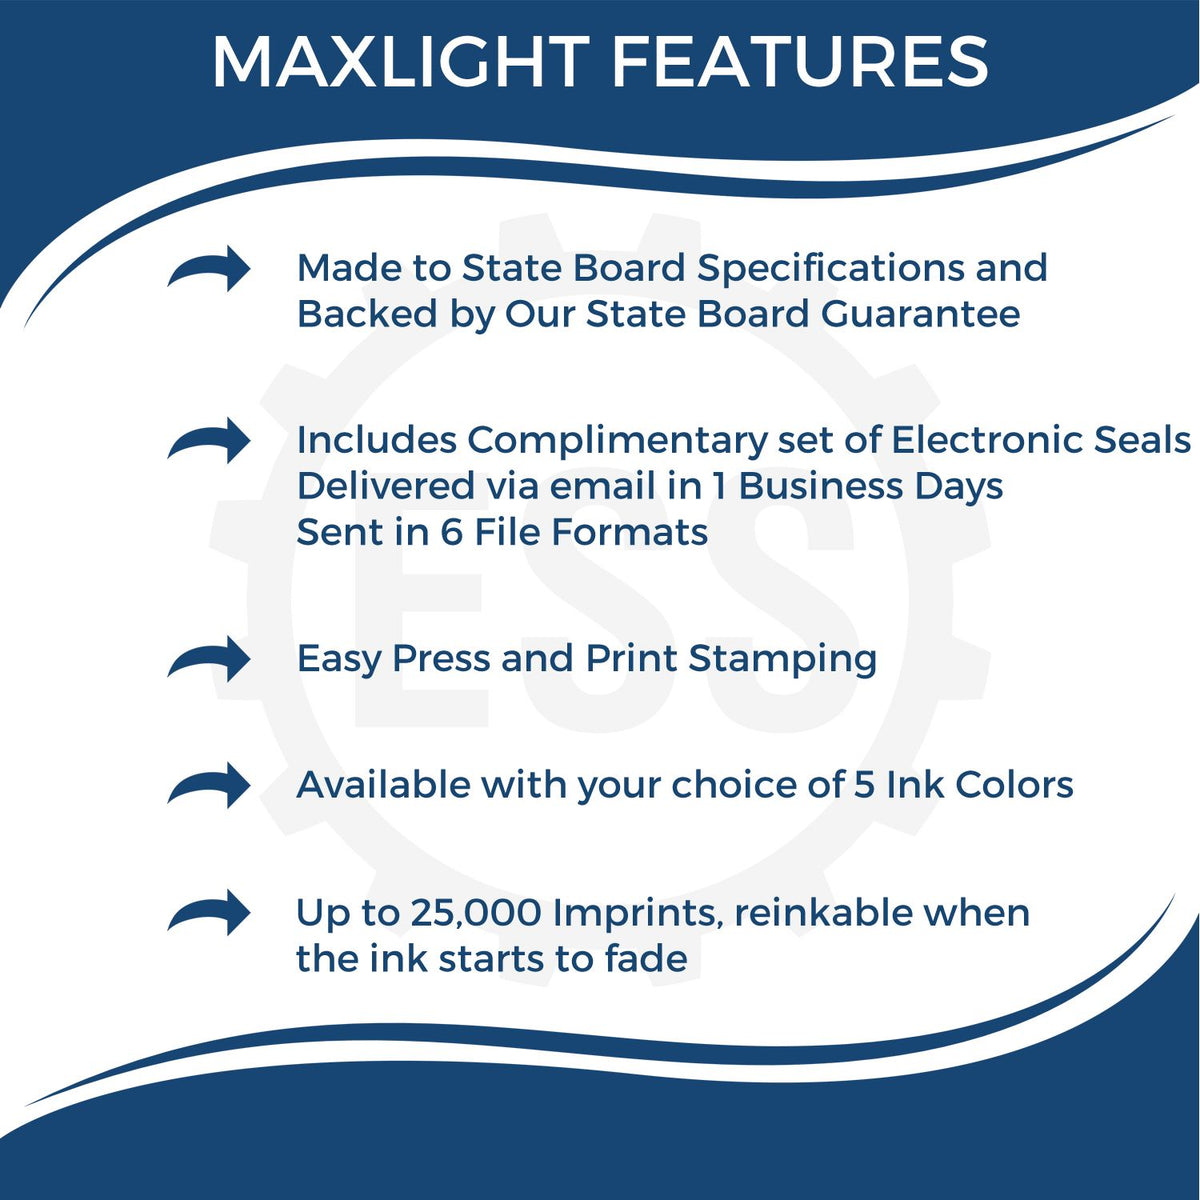 A picture of an infographic highlighting the selling points for the Premium MaxLight Pre-Inked Alaska Engineering Stamp